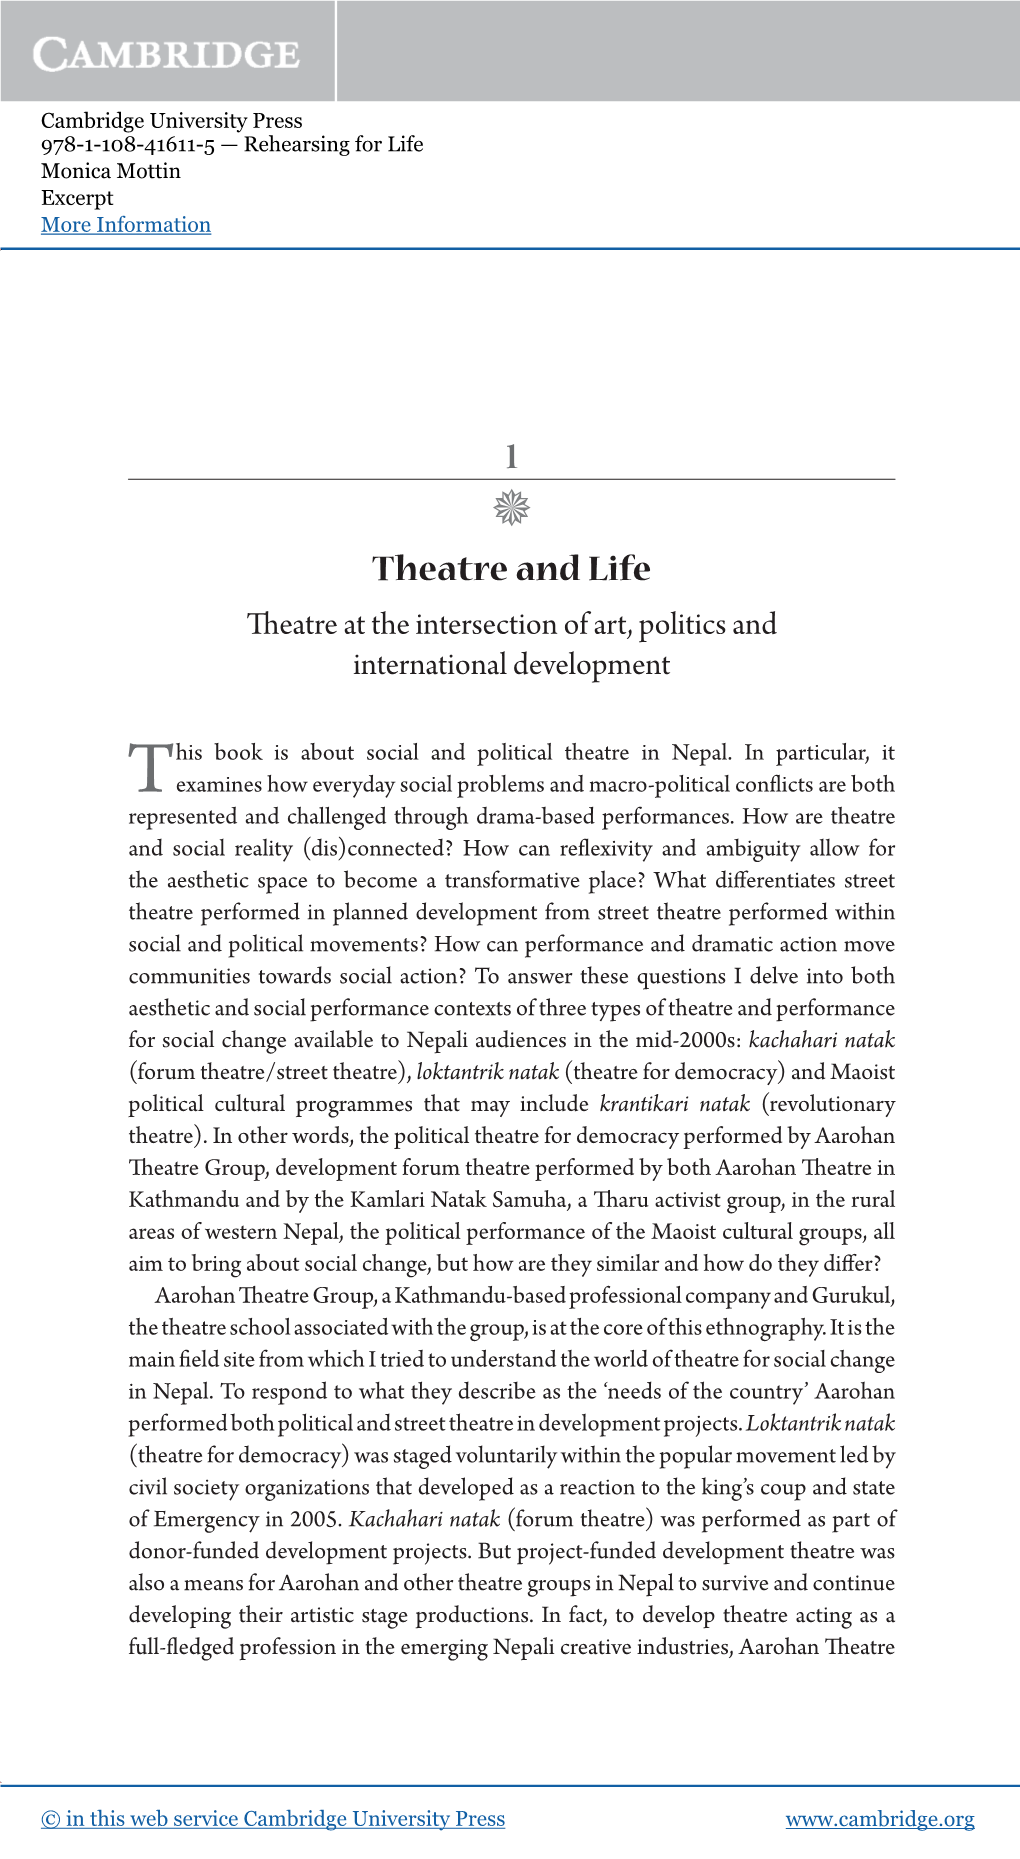 Theatre and Life Heatre at the Intersection of Art, Politics and International Development